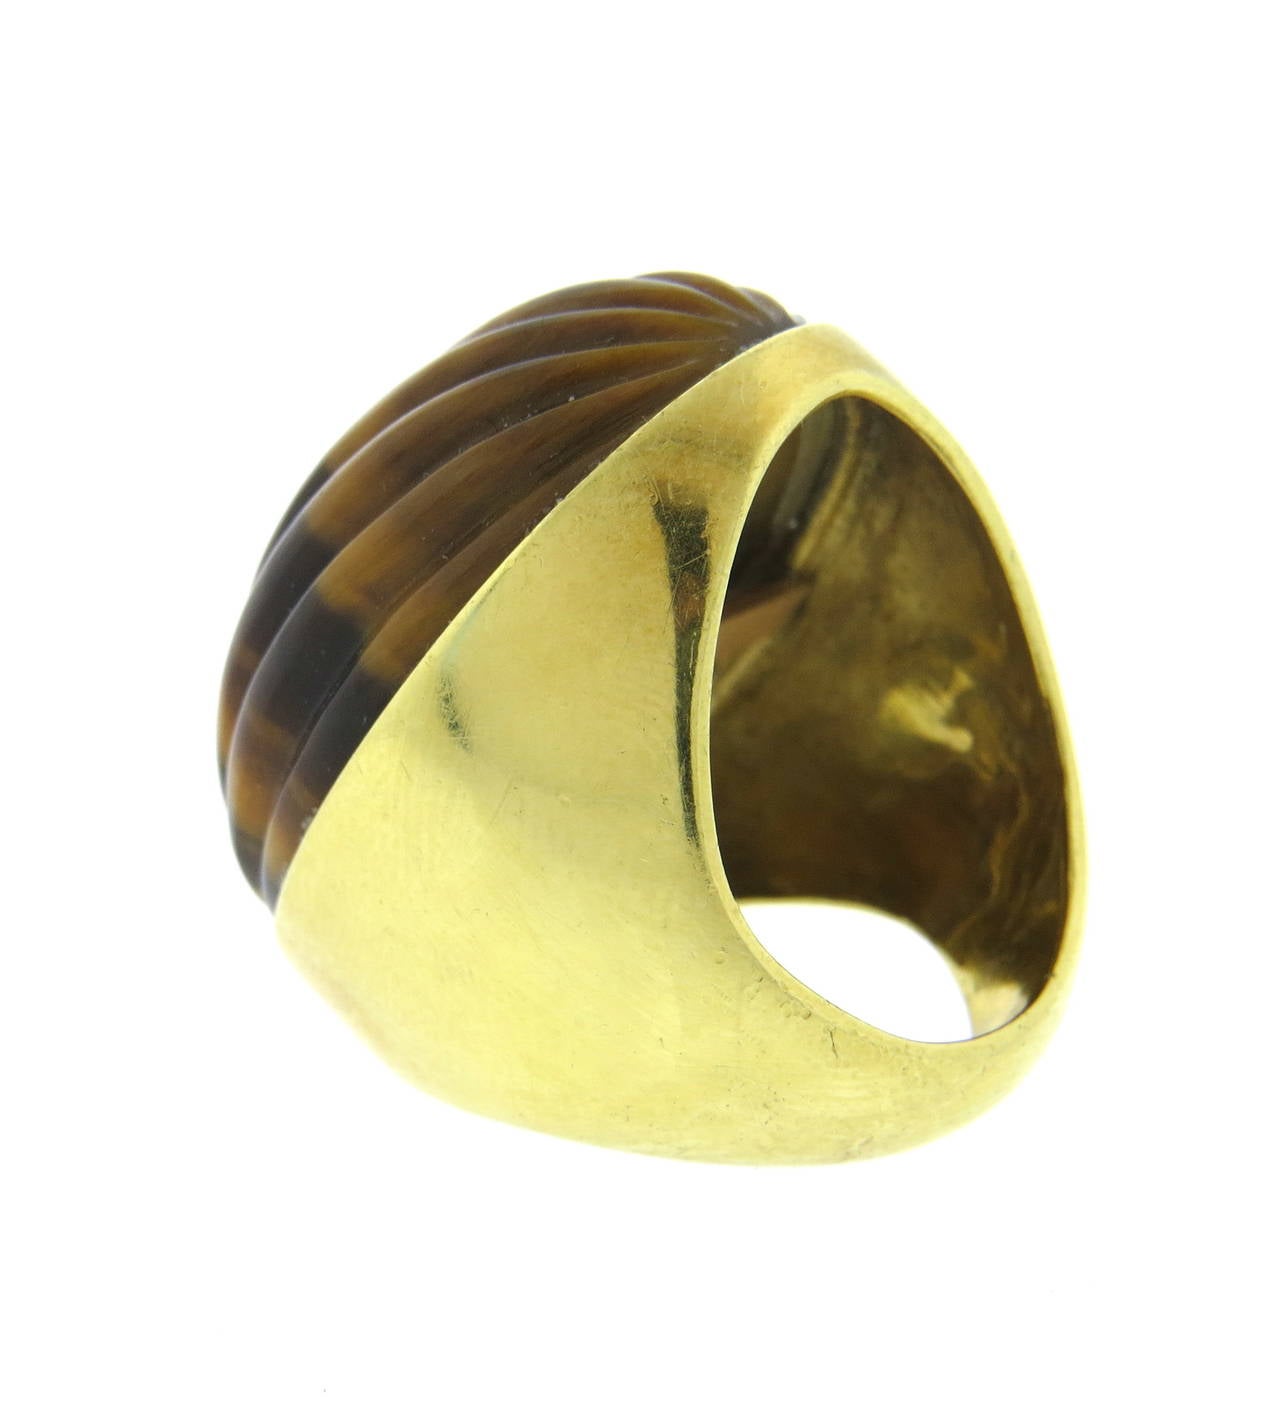 Large vintage 18k gold ring, featuring ribbed oval tiger's eye. Ring is a size 7, ring top is 31mm x 22mm. Weight of the piece - 24.8 grams